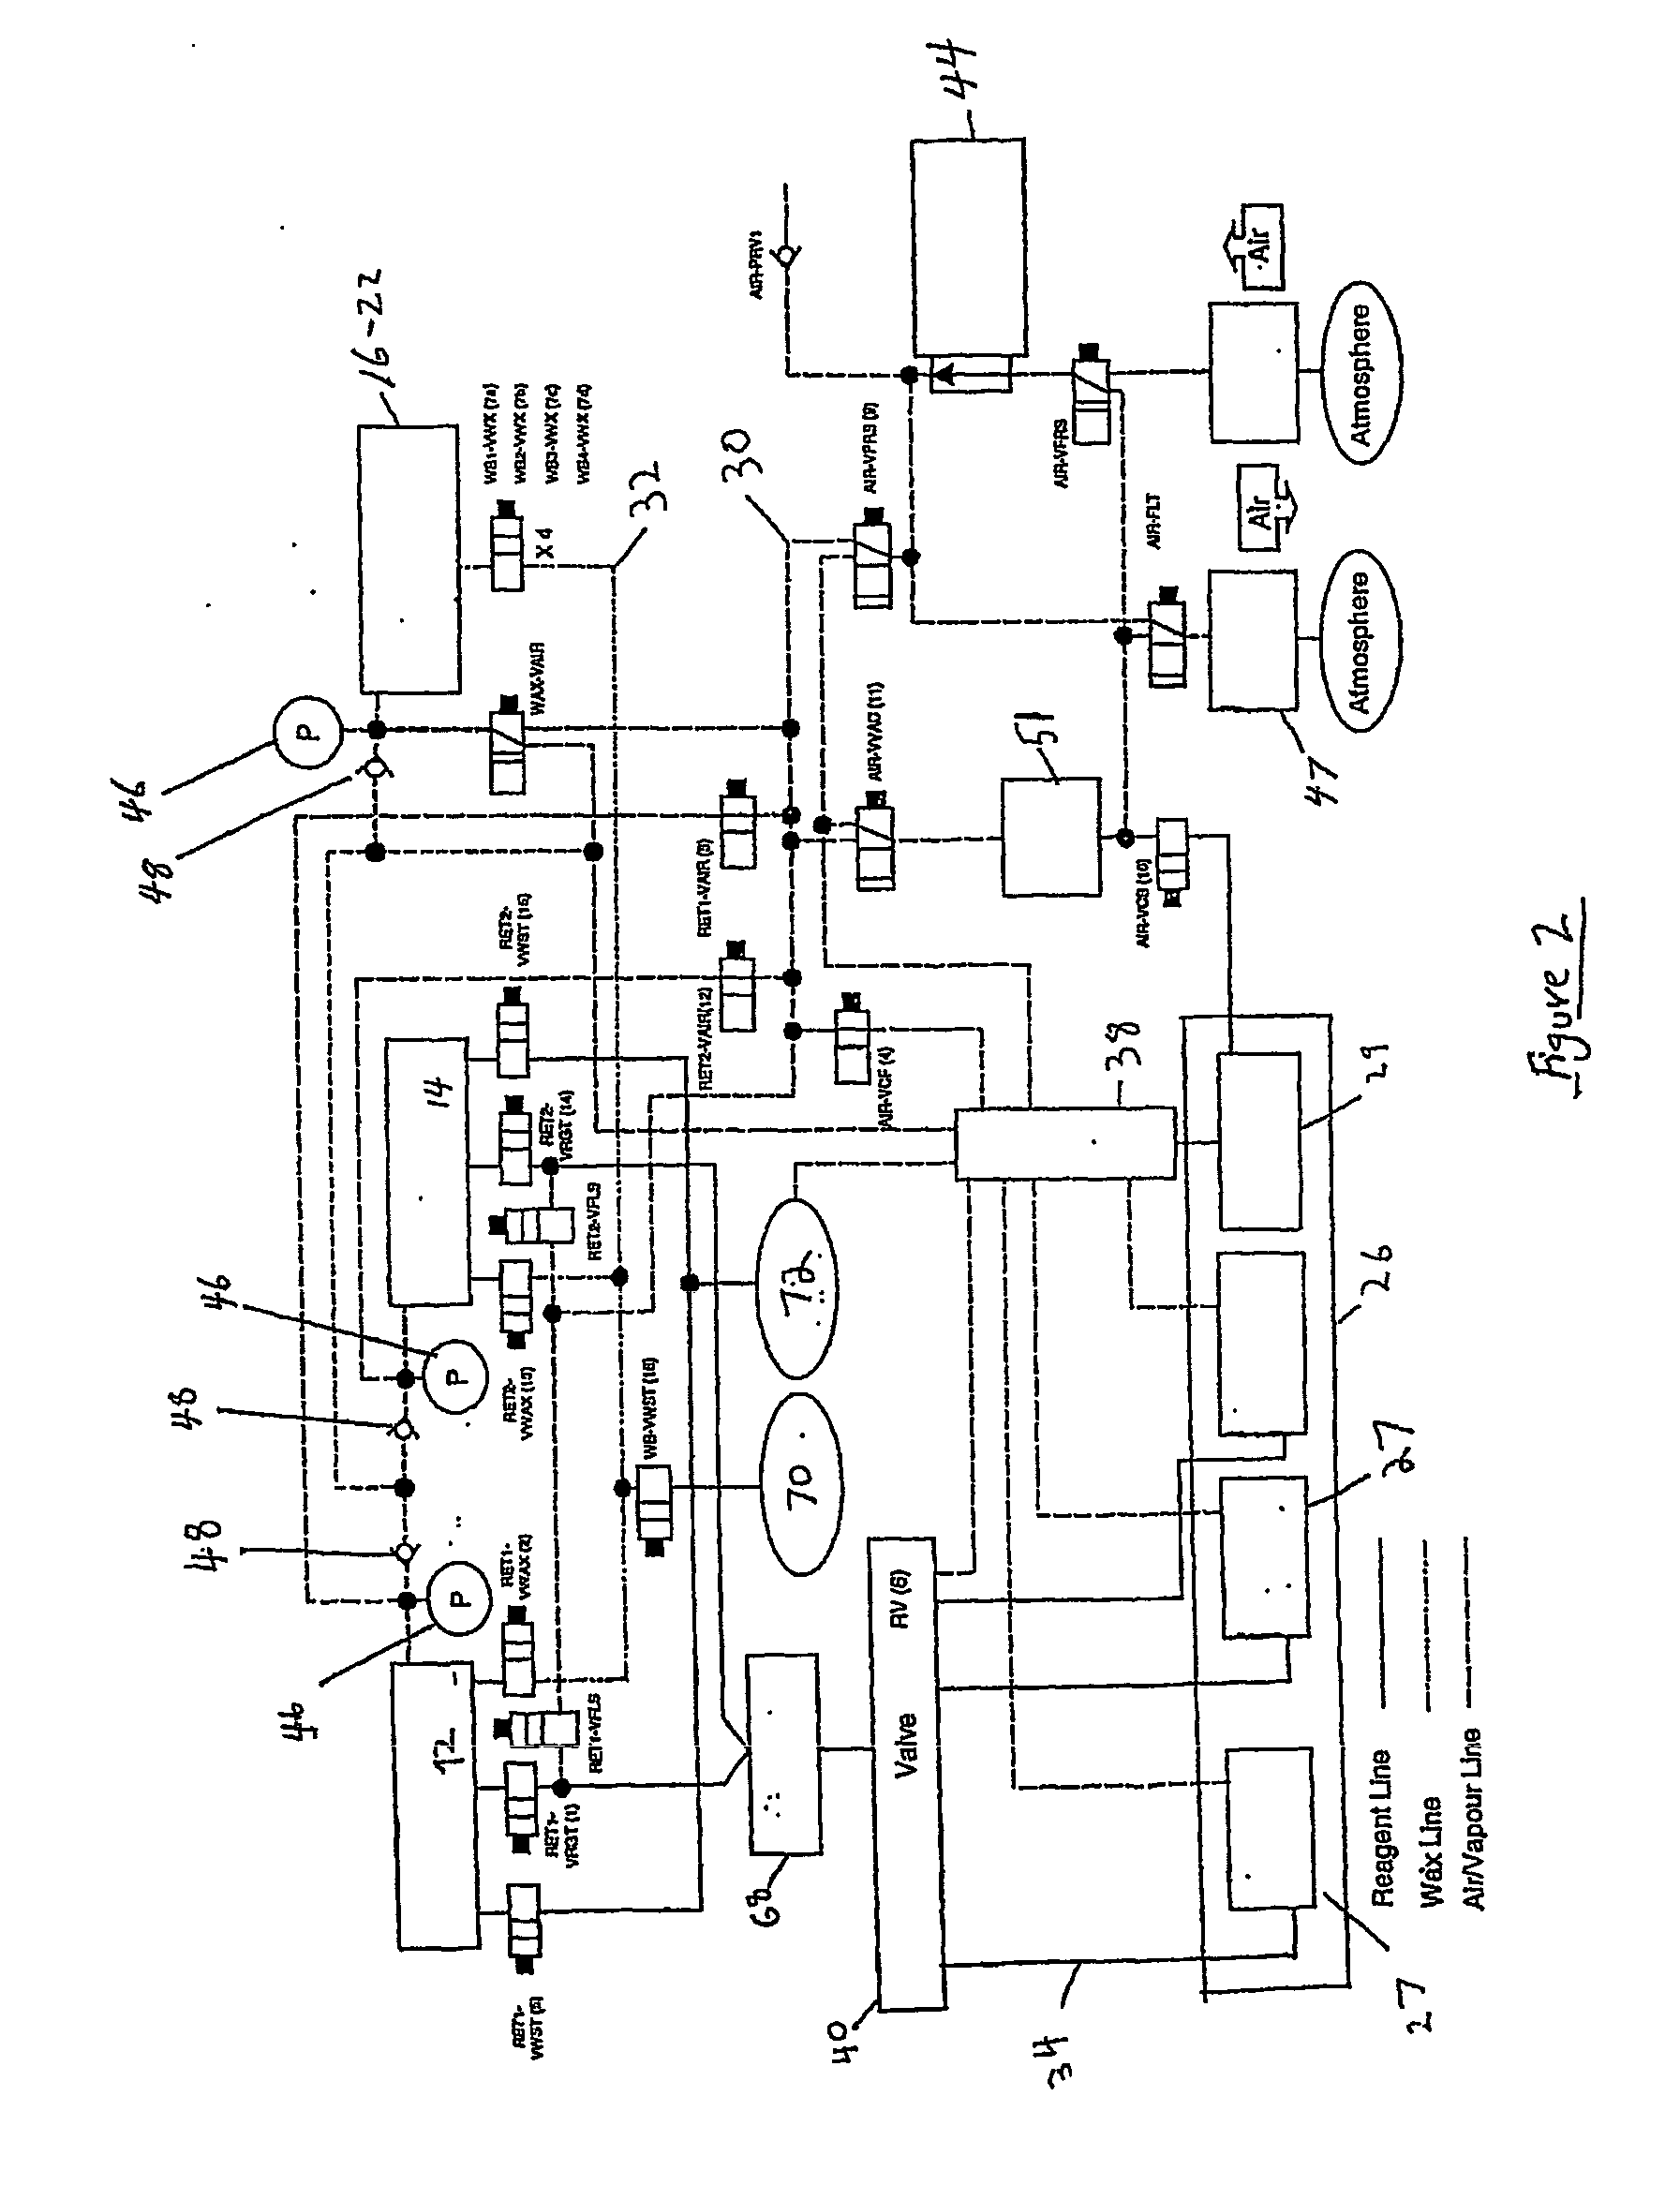 System and Method for Histological Tissue Specimen Processing